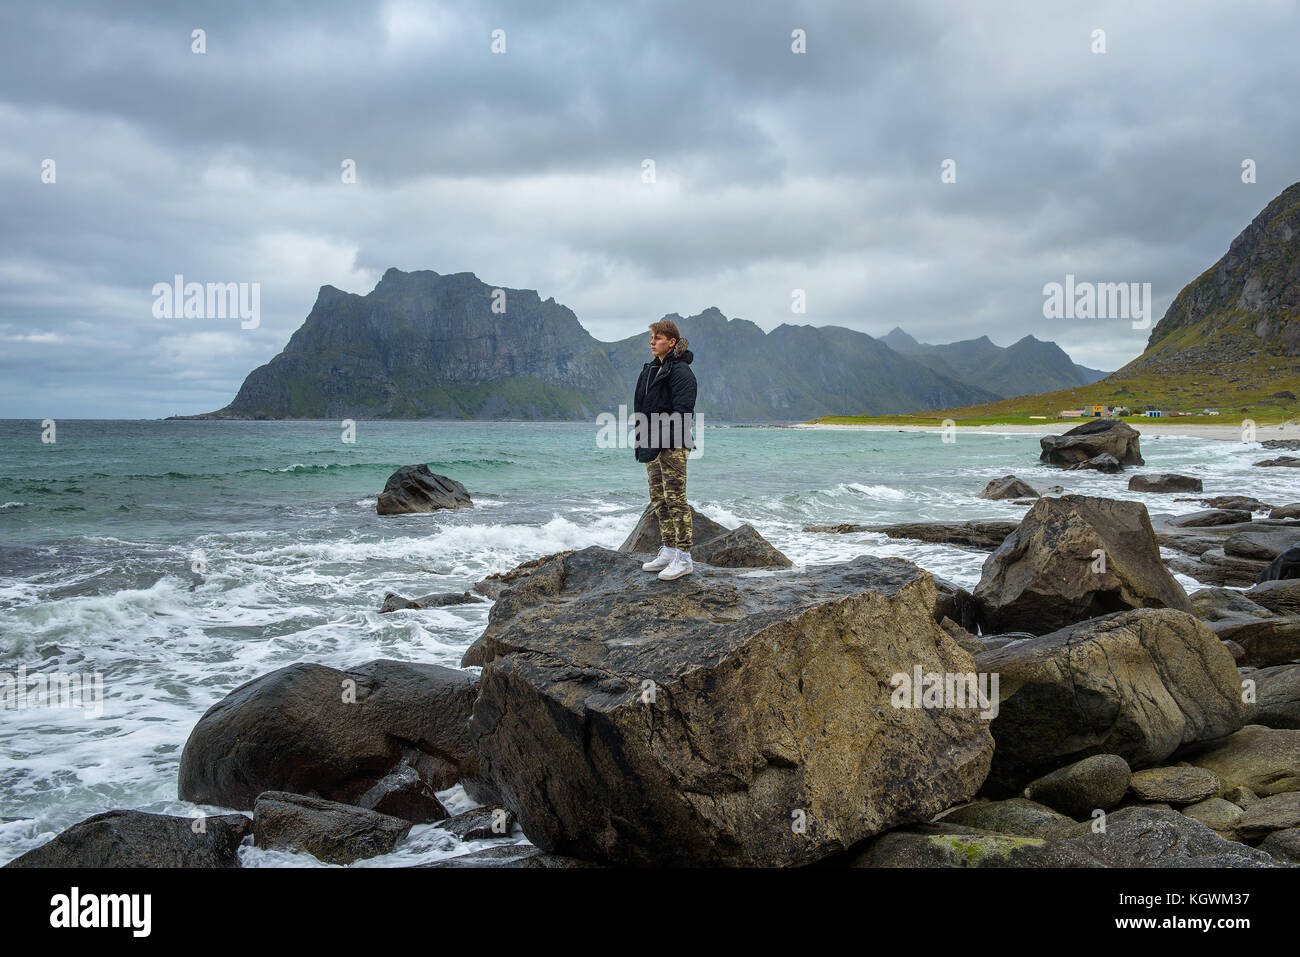 Boy stands on a big rock and enjoys the view over a beach in Norway Stock Photo